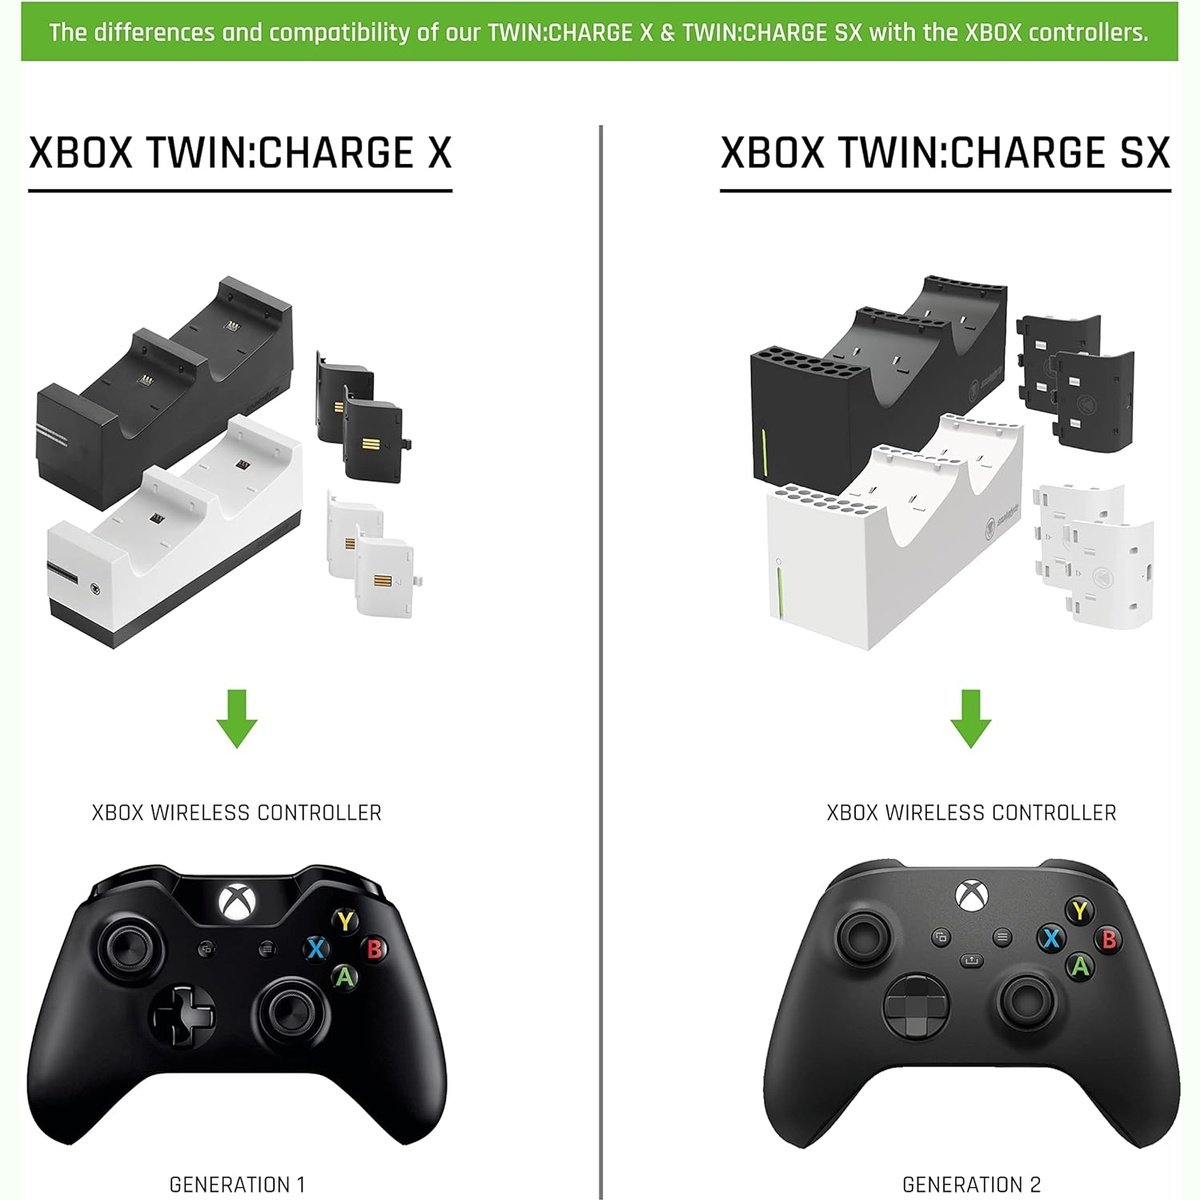 Chargeur double Twin Charge XTM snakebyte pour manette Xbox One